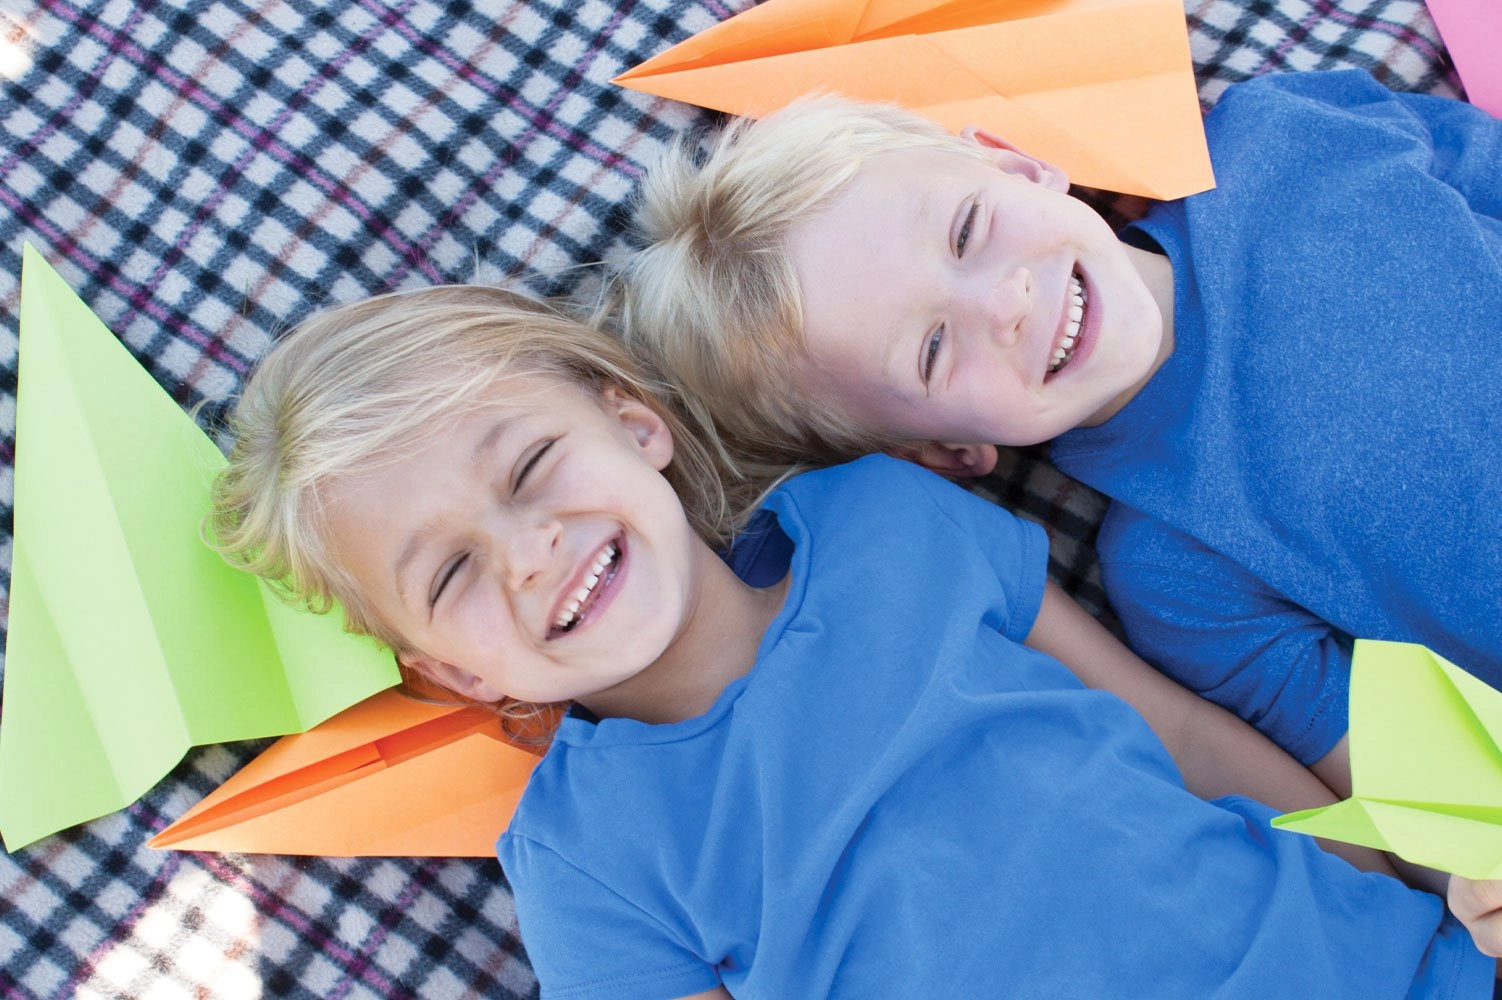 A smiling young boy and girl laying on a blanket, playing with paper planes.